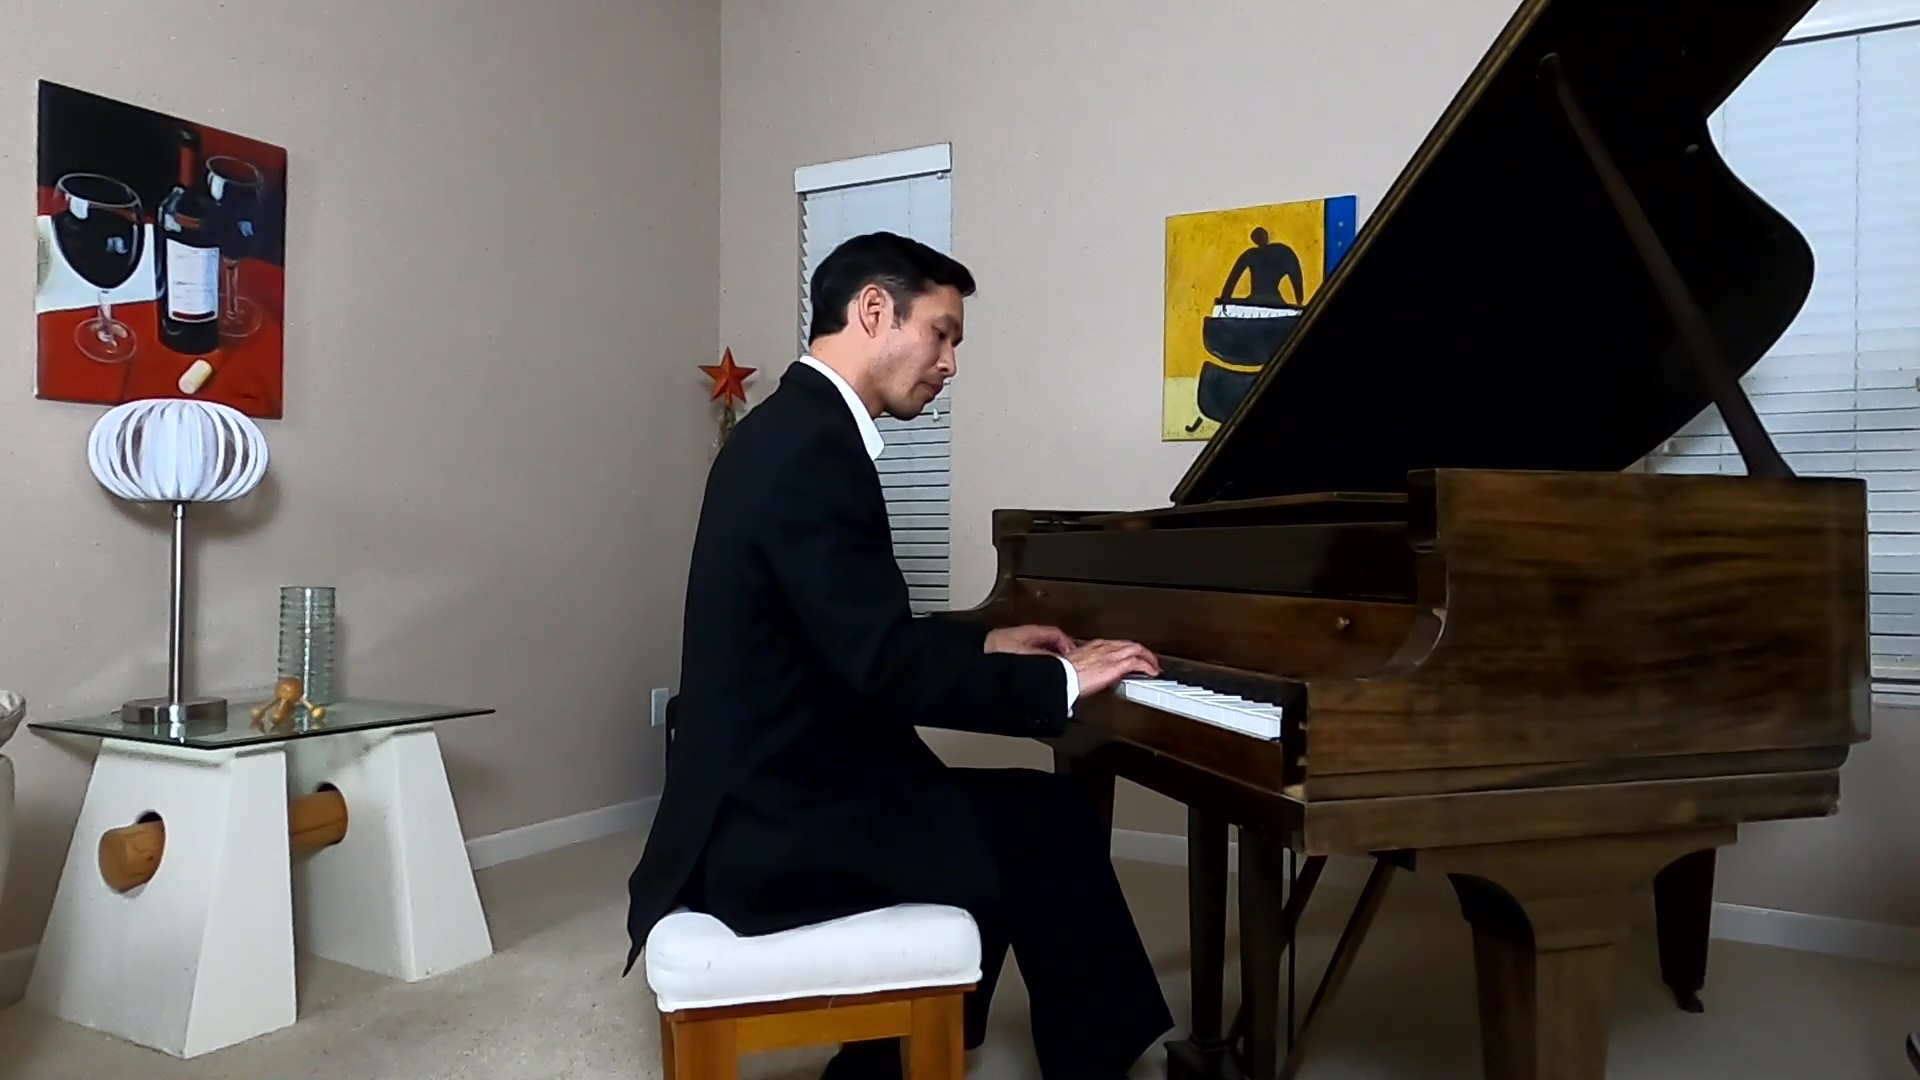 Felix Wong wearing a black suit playing a baby grand piano in his livng room